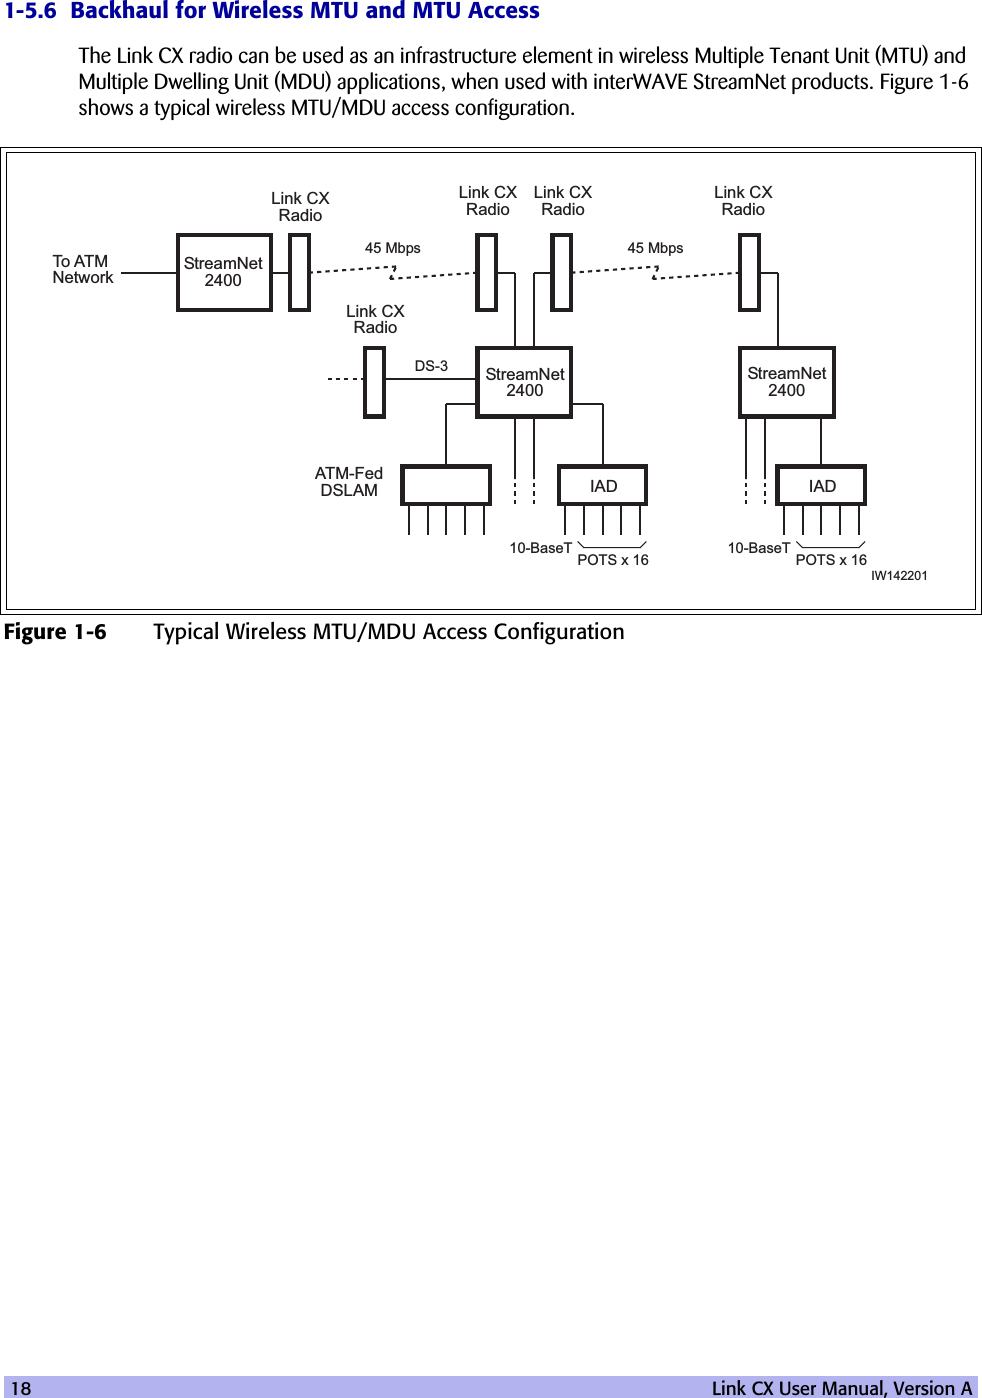 18   Link CX User Manual, Version A1-5.6  Backhaul for Wireless MTU and MTU AccessThe Link CX radio can be used as an infrastructure element in wireless Multiple Tenant Unit (MTU) and Multiple Dwelling Unit (MDU) applications, when used with interWAVE StreamNet products. Figure 1-6 shows a typical wireless MTU/MDU access configuration.Figure 1-6 Typical Wireless MTU/MDU Access ConfigurationIW142201StreamNet2400StreamNet2400StreamNet2400To AT MNetworkLink CXRadioLink CXRadioLink CXRadioLink CXRadio45 MbpsDS-3ATM-FedDSLAM IAD IAD10-BaseT POTS x 16 10-BaseT POTS x 16Link CXRadio45 Mbps